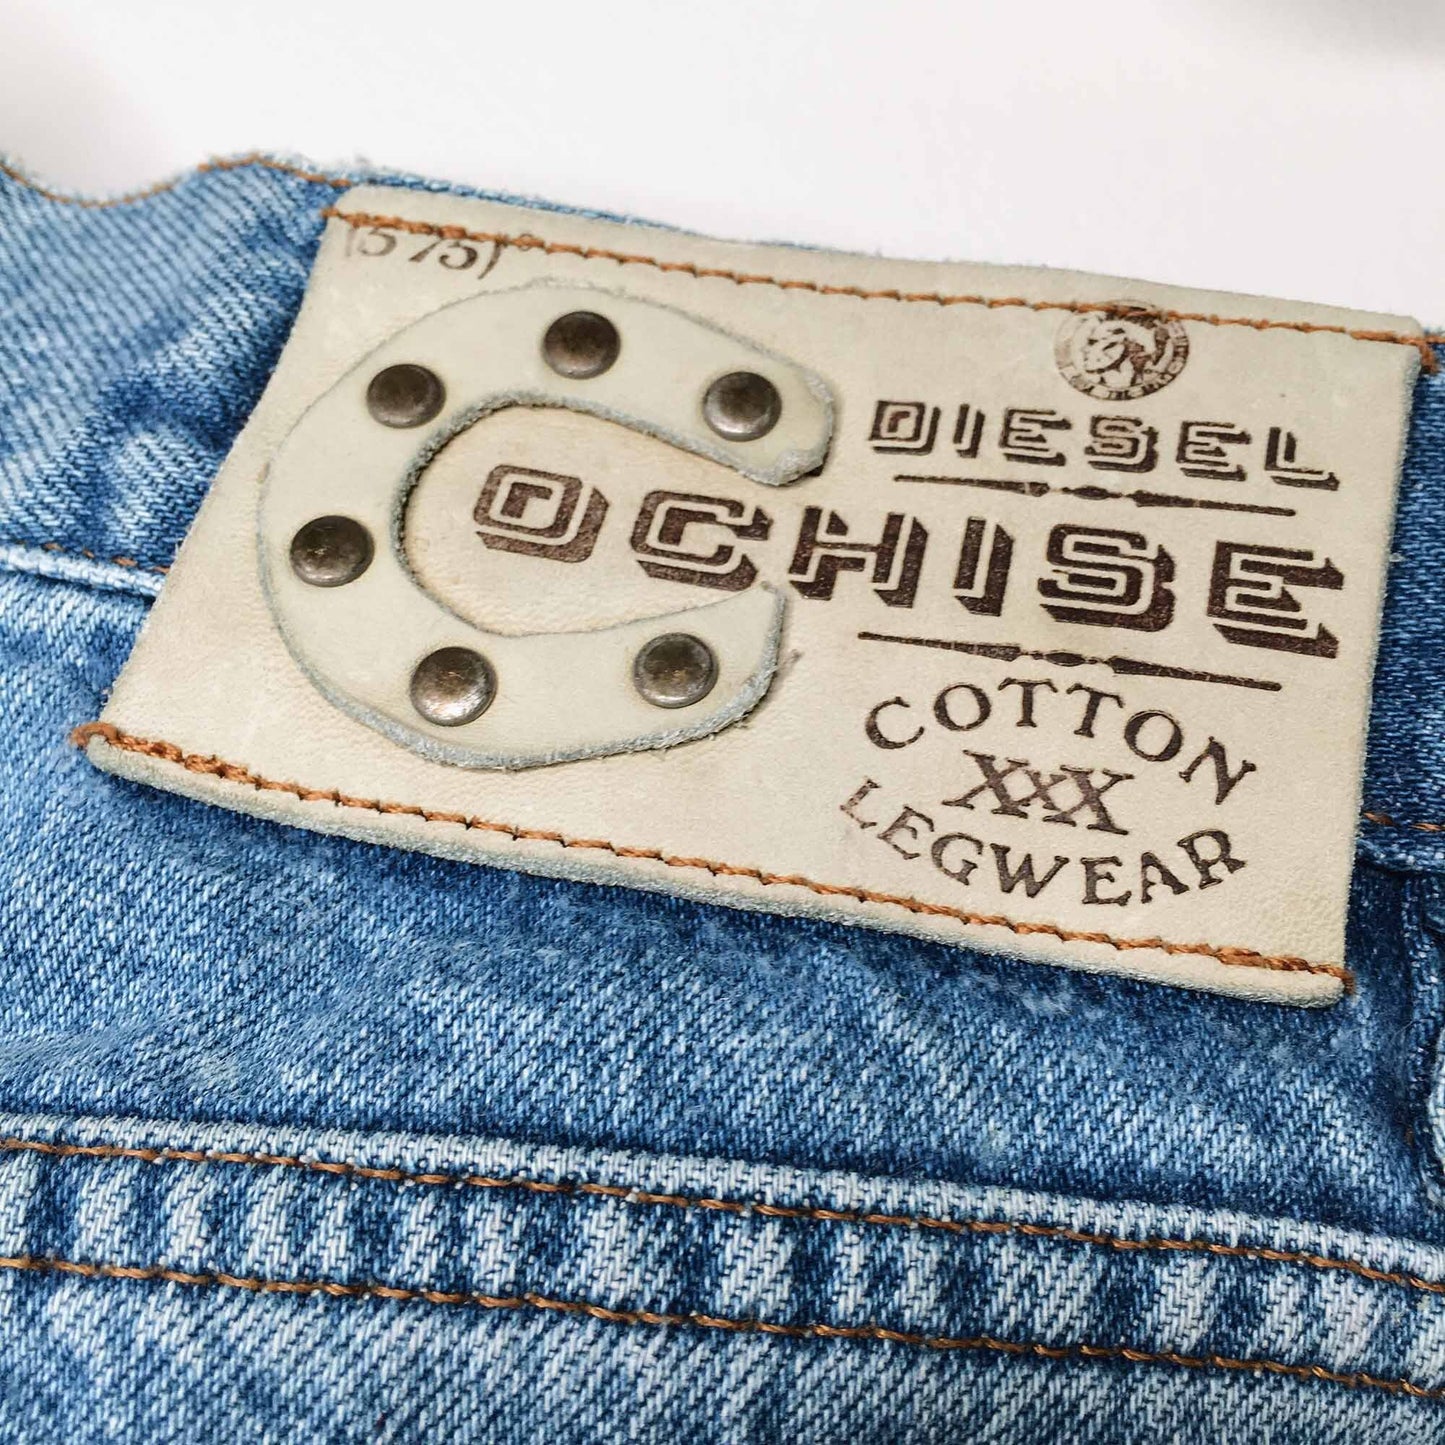 Vintage 90's Diesel 575 Cochise high rise button fly jeans - size 26